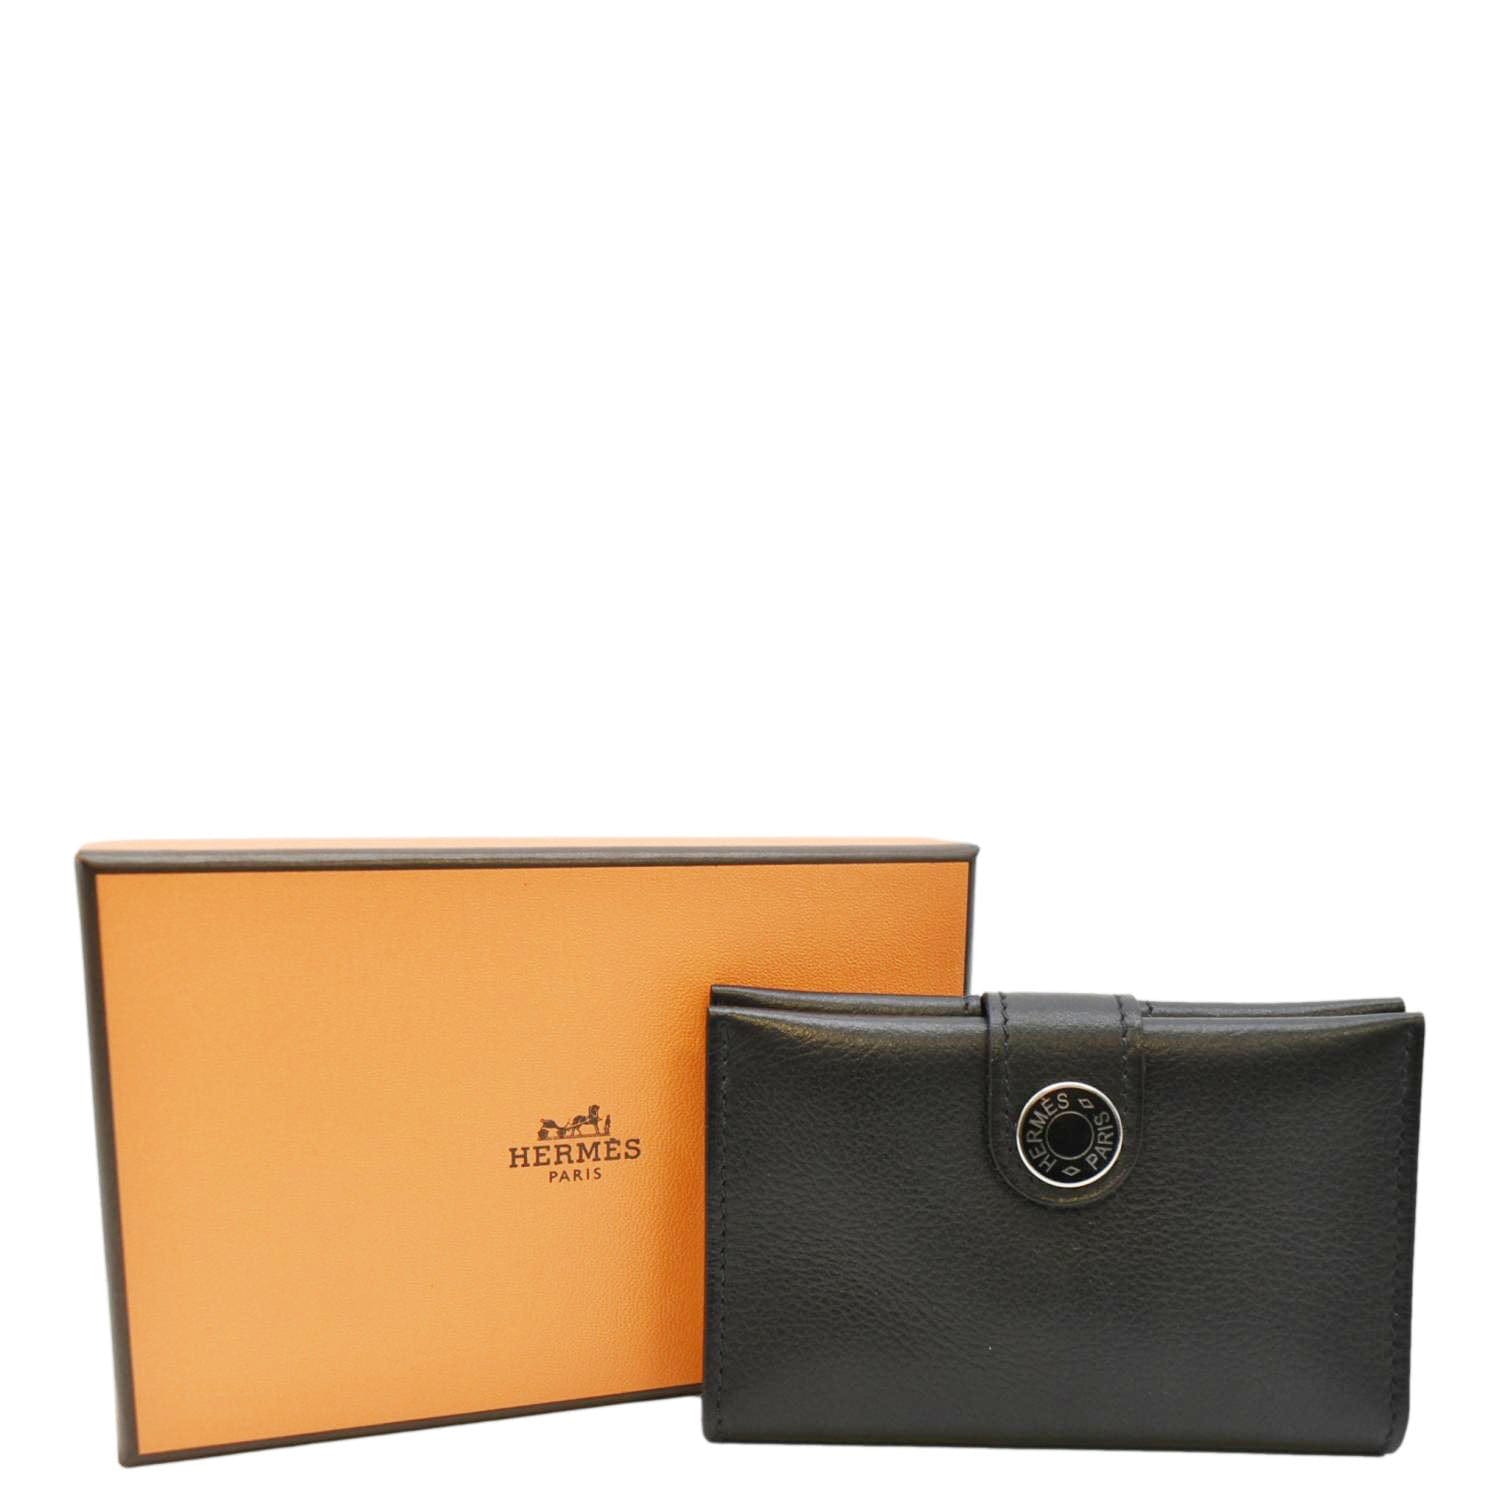 Hermes, Bags, Hermes Authentic Dogon Wallet